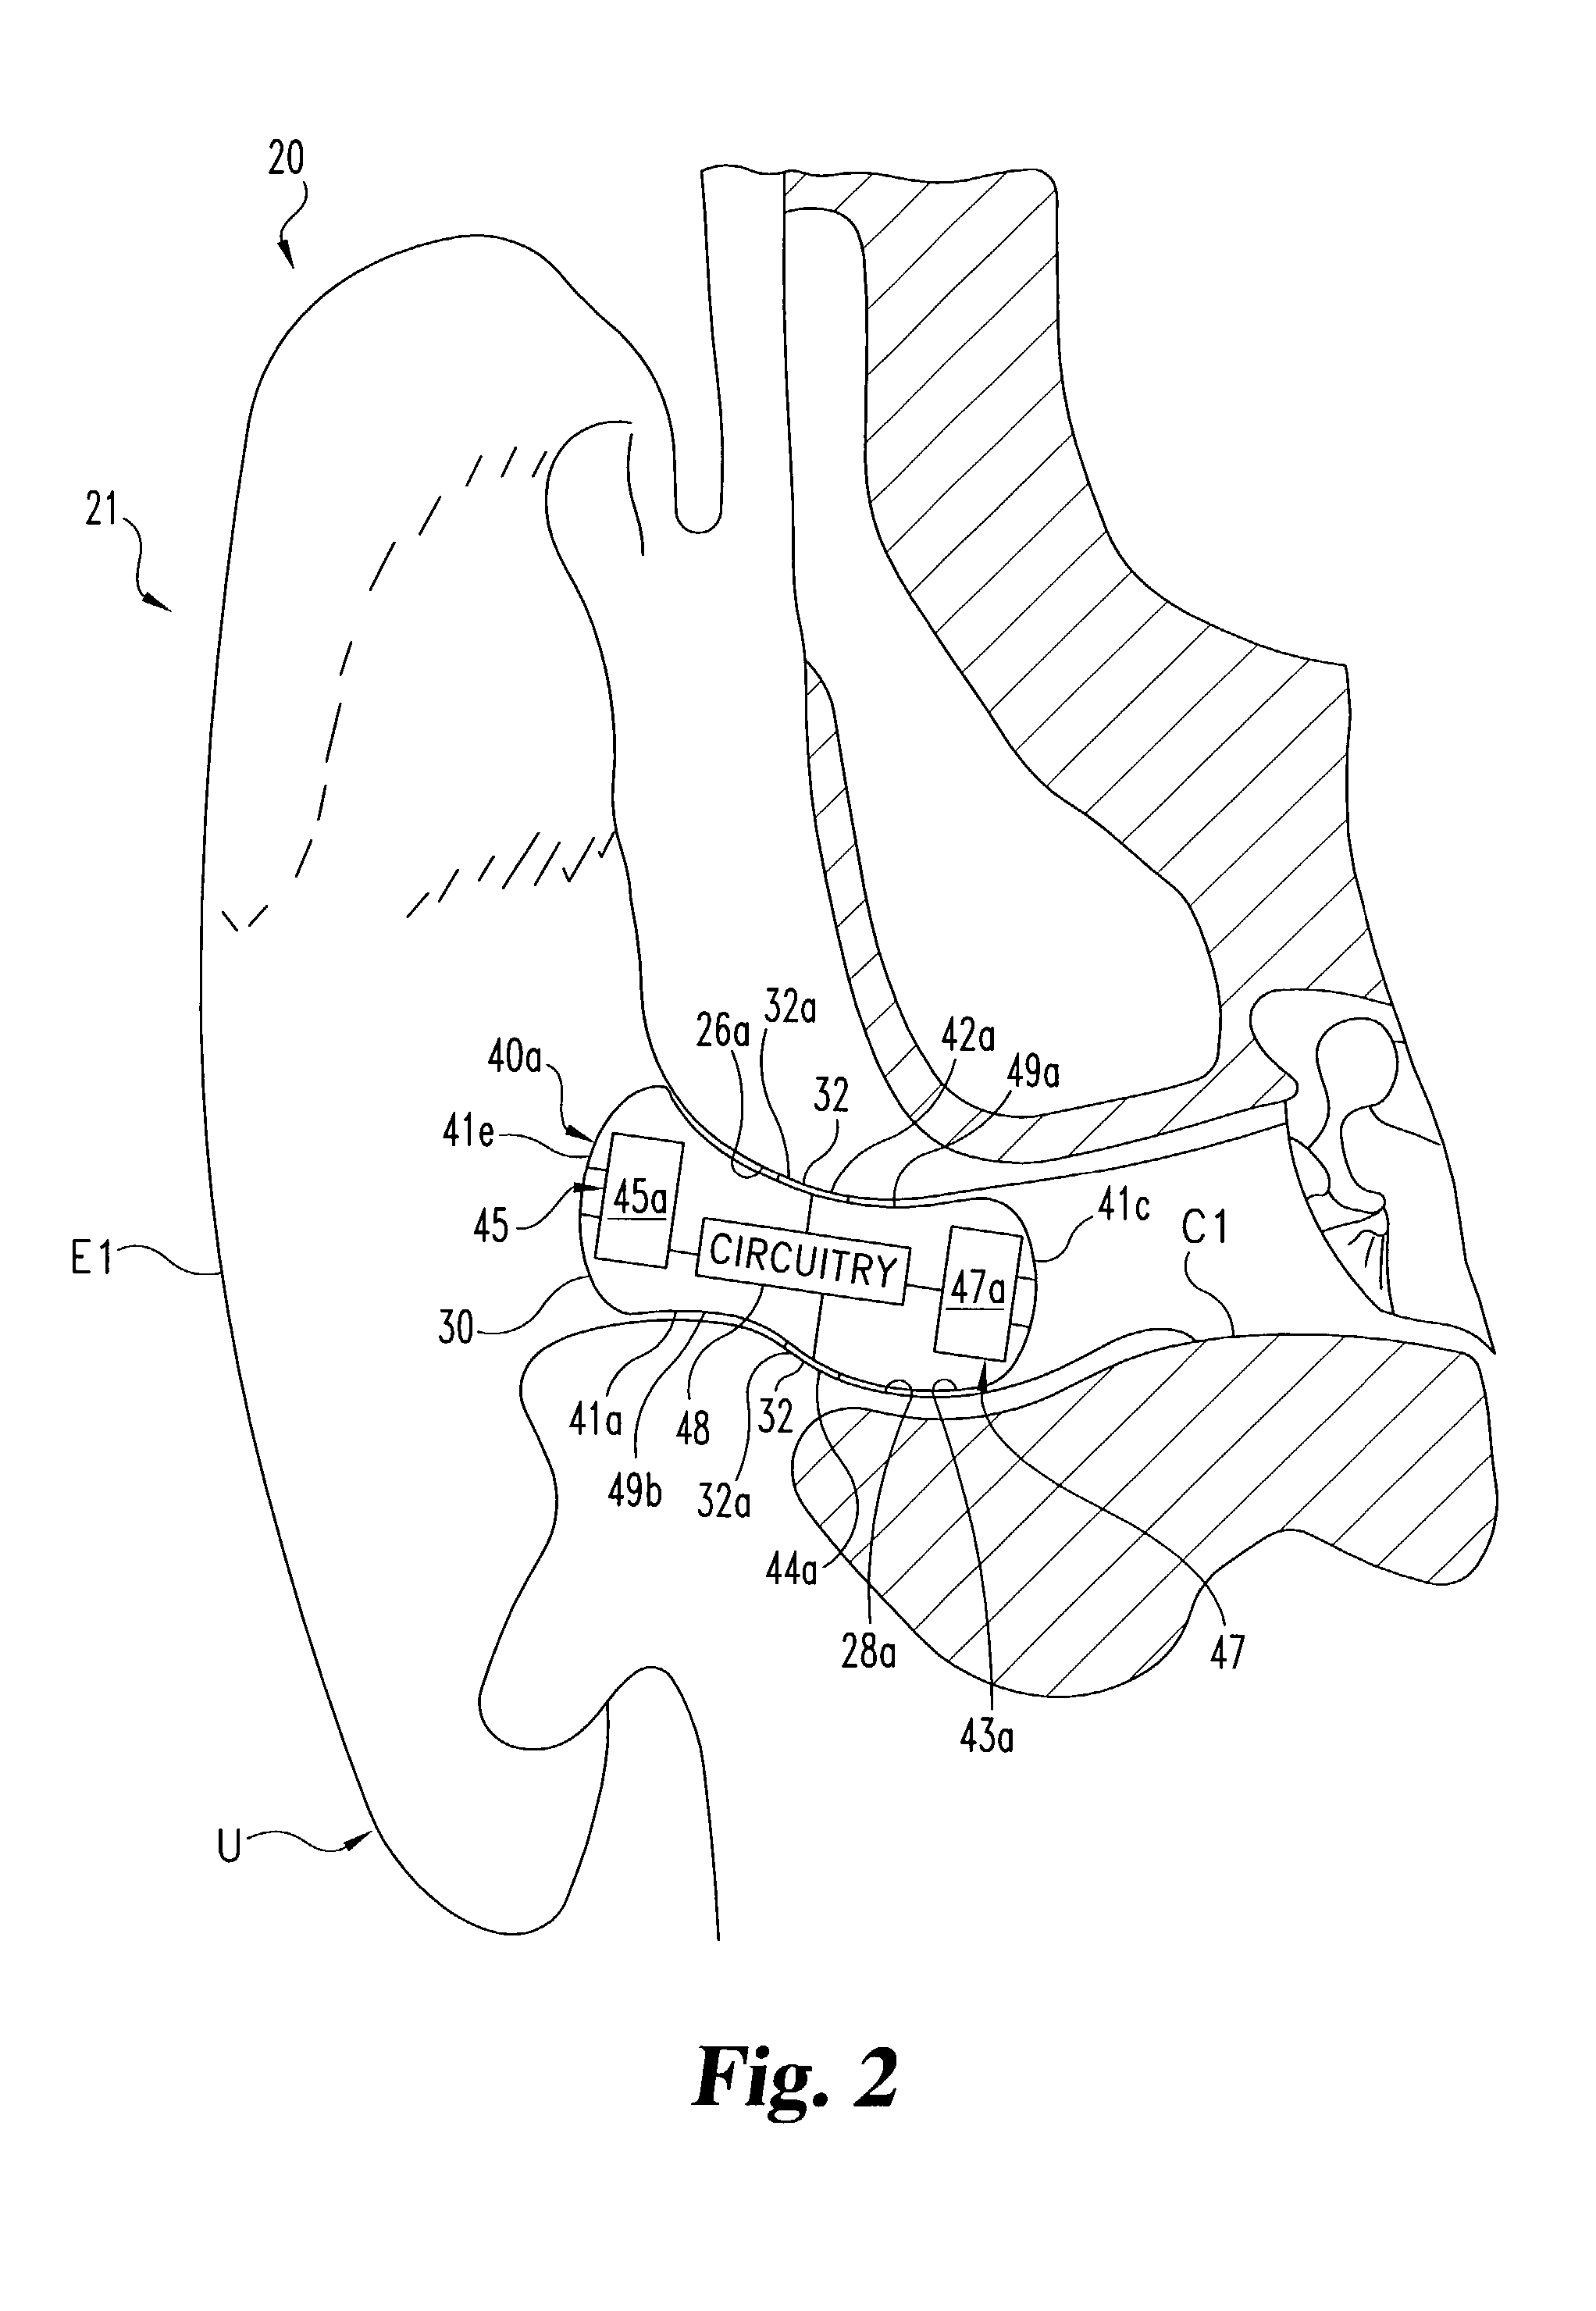 Electrode placement for wireless intrabody communication between components of a hearing system